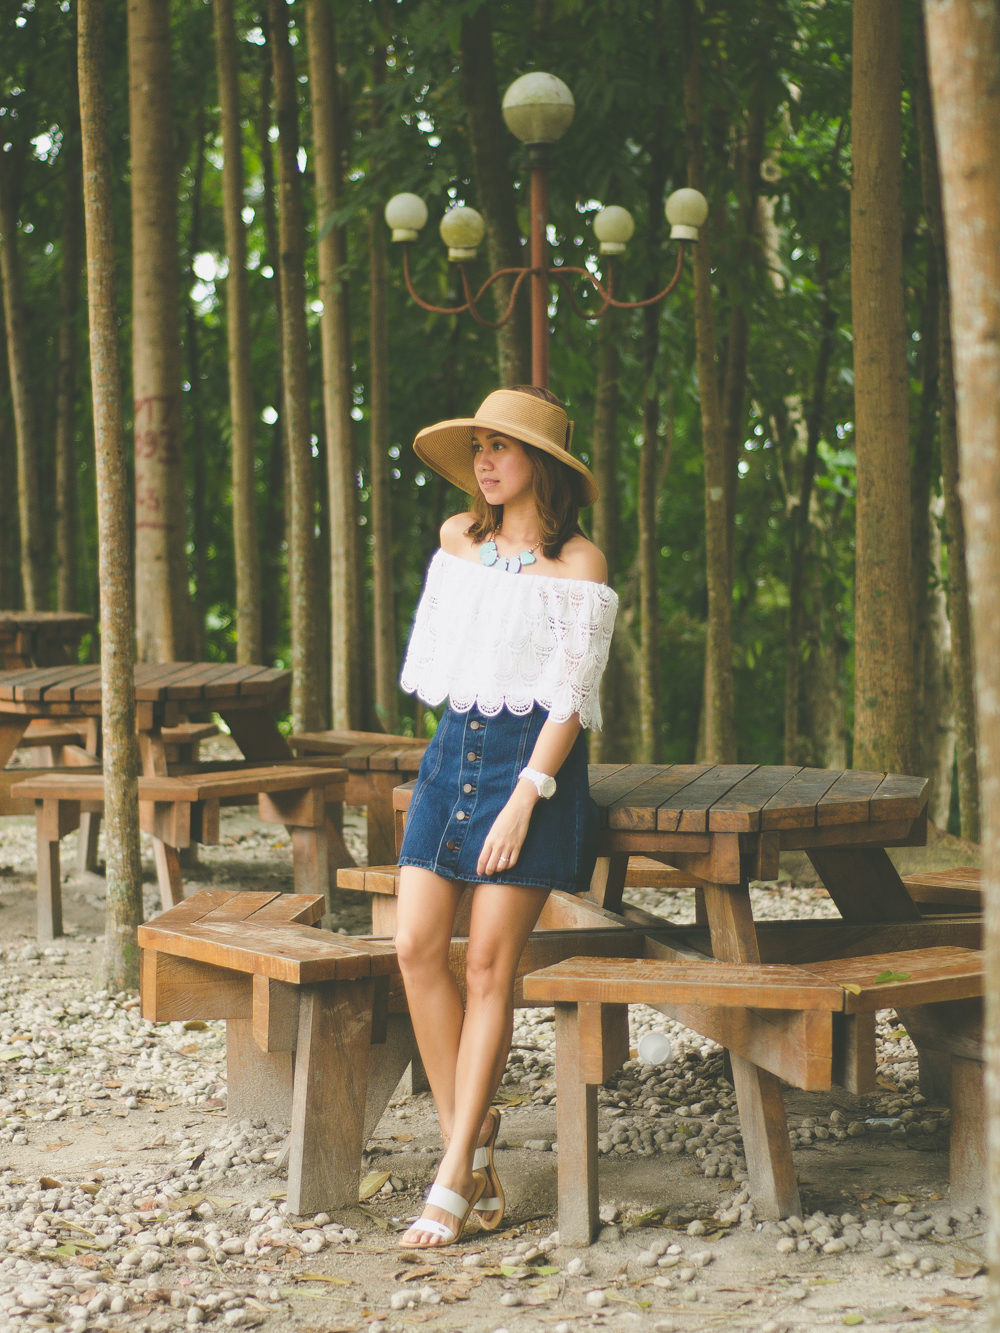 Alchemy of Fashion, Off Shoulder Top, Wide brimmed hat, Turquoise necklace, Denim Button-front skirt, A-Line Skirt, Seventies Trend, 70s Fashion, Celine Sandals, Denim A-line skirt, Cebu Fashion Blogger, Toni Pino-Oca, Cebu Fashion Blog, Cebu Blogger, Cebu Bloggers, Cebuana, Summer Outfit, Summer Style 